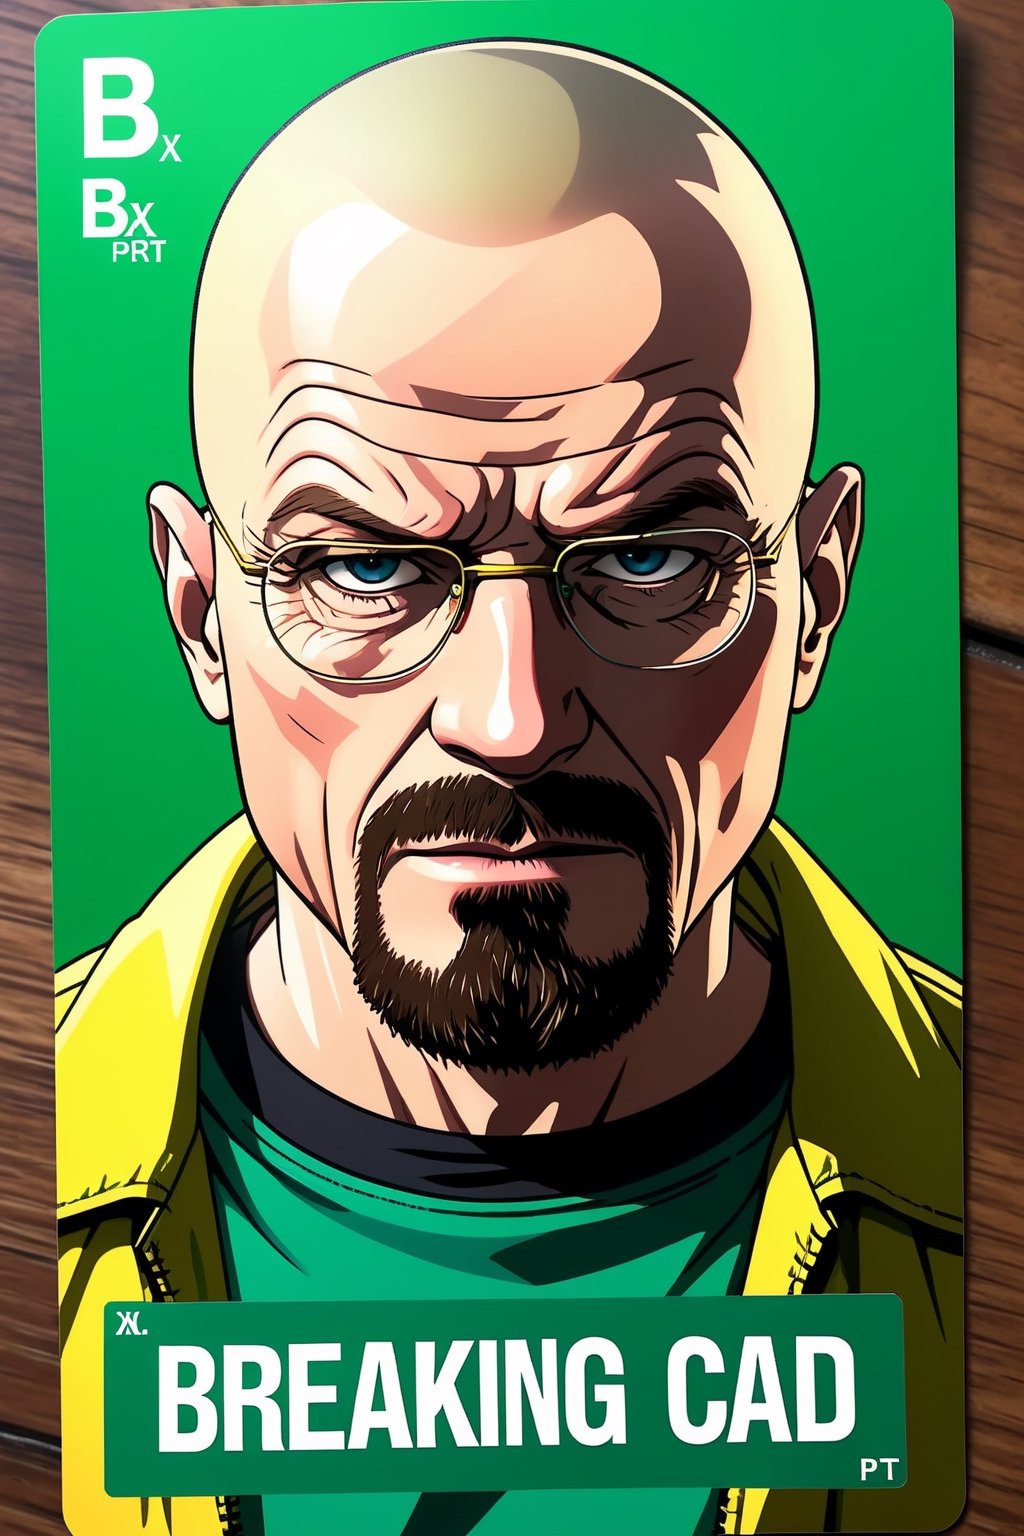 inframe add bold text "Breaking Bad" name ""Breaking Bad"" premium anime card 14PT authenticated cardstock amazing,dark colors,
,more detail XL